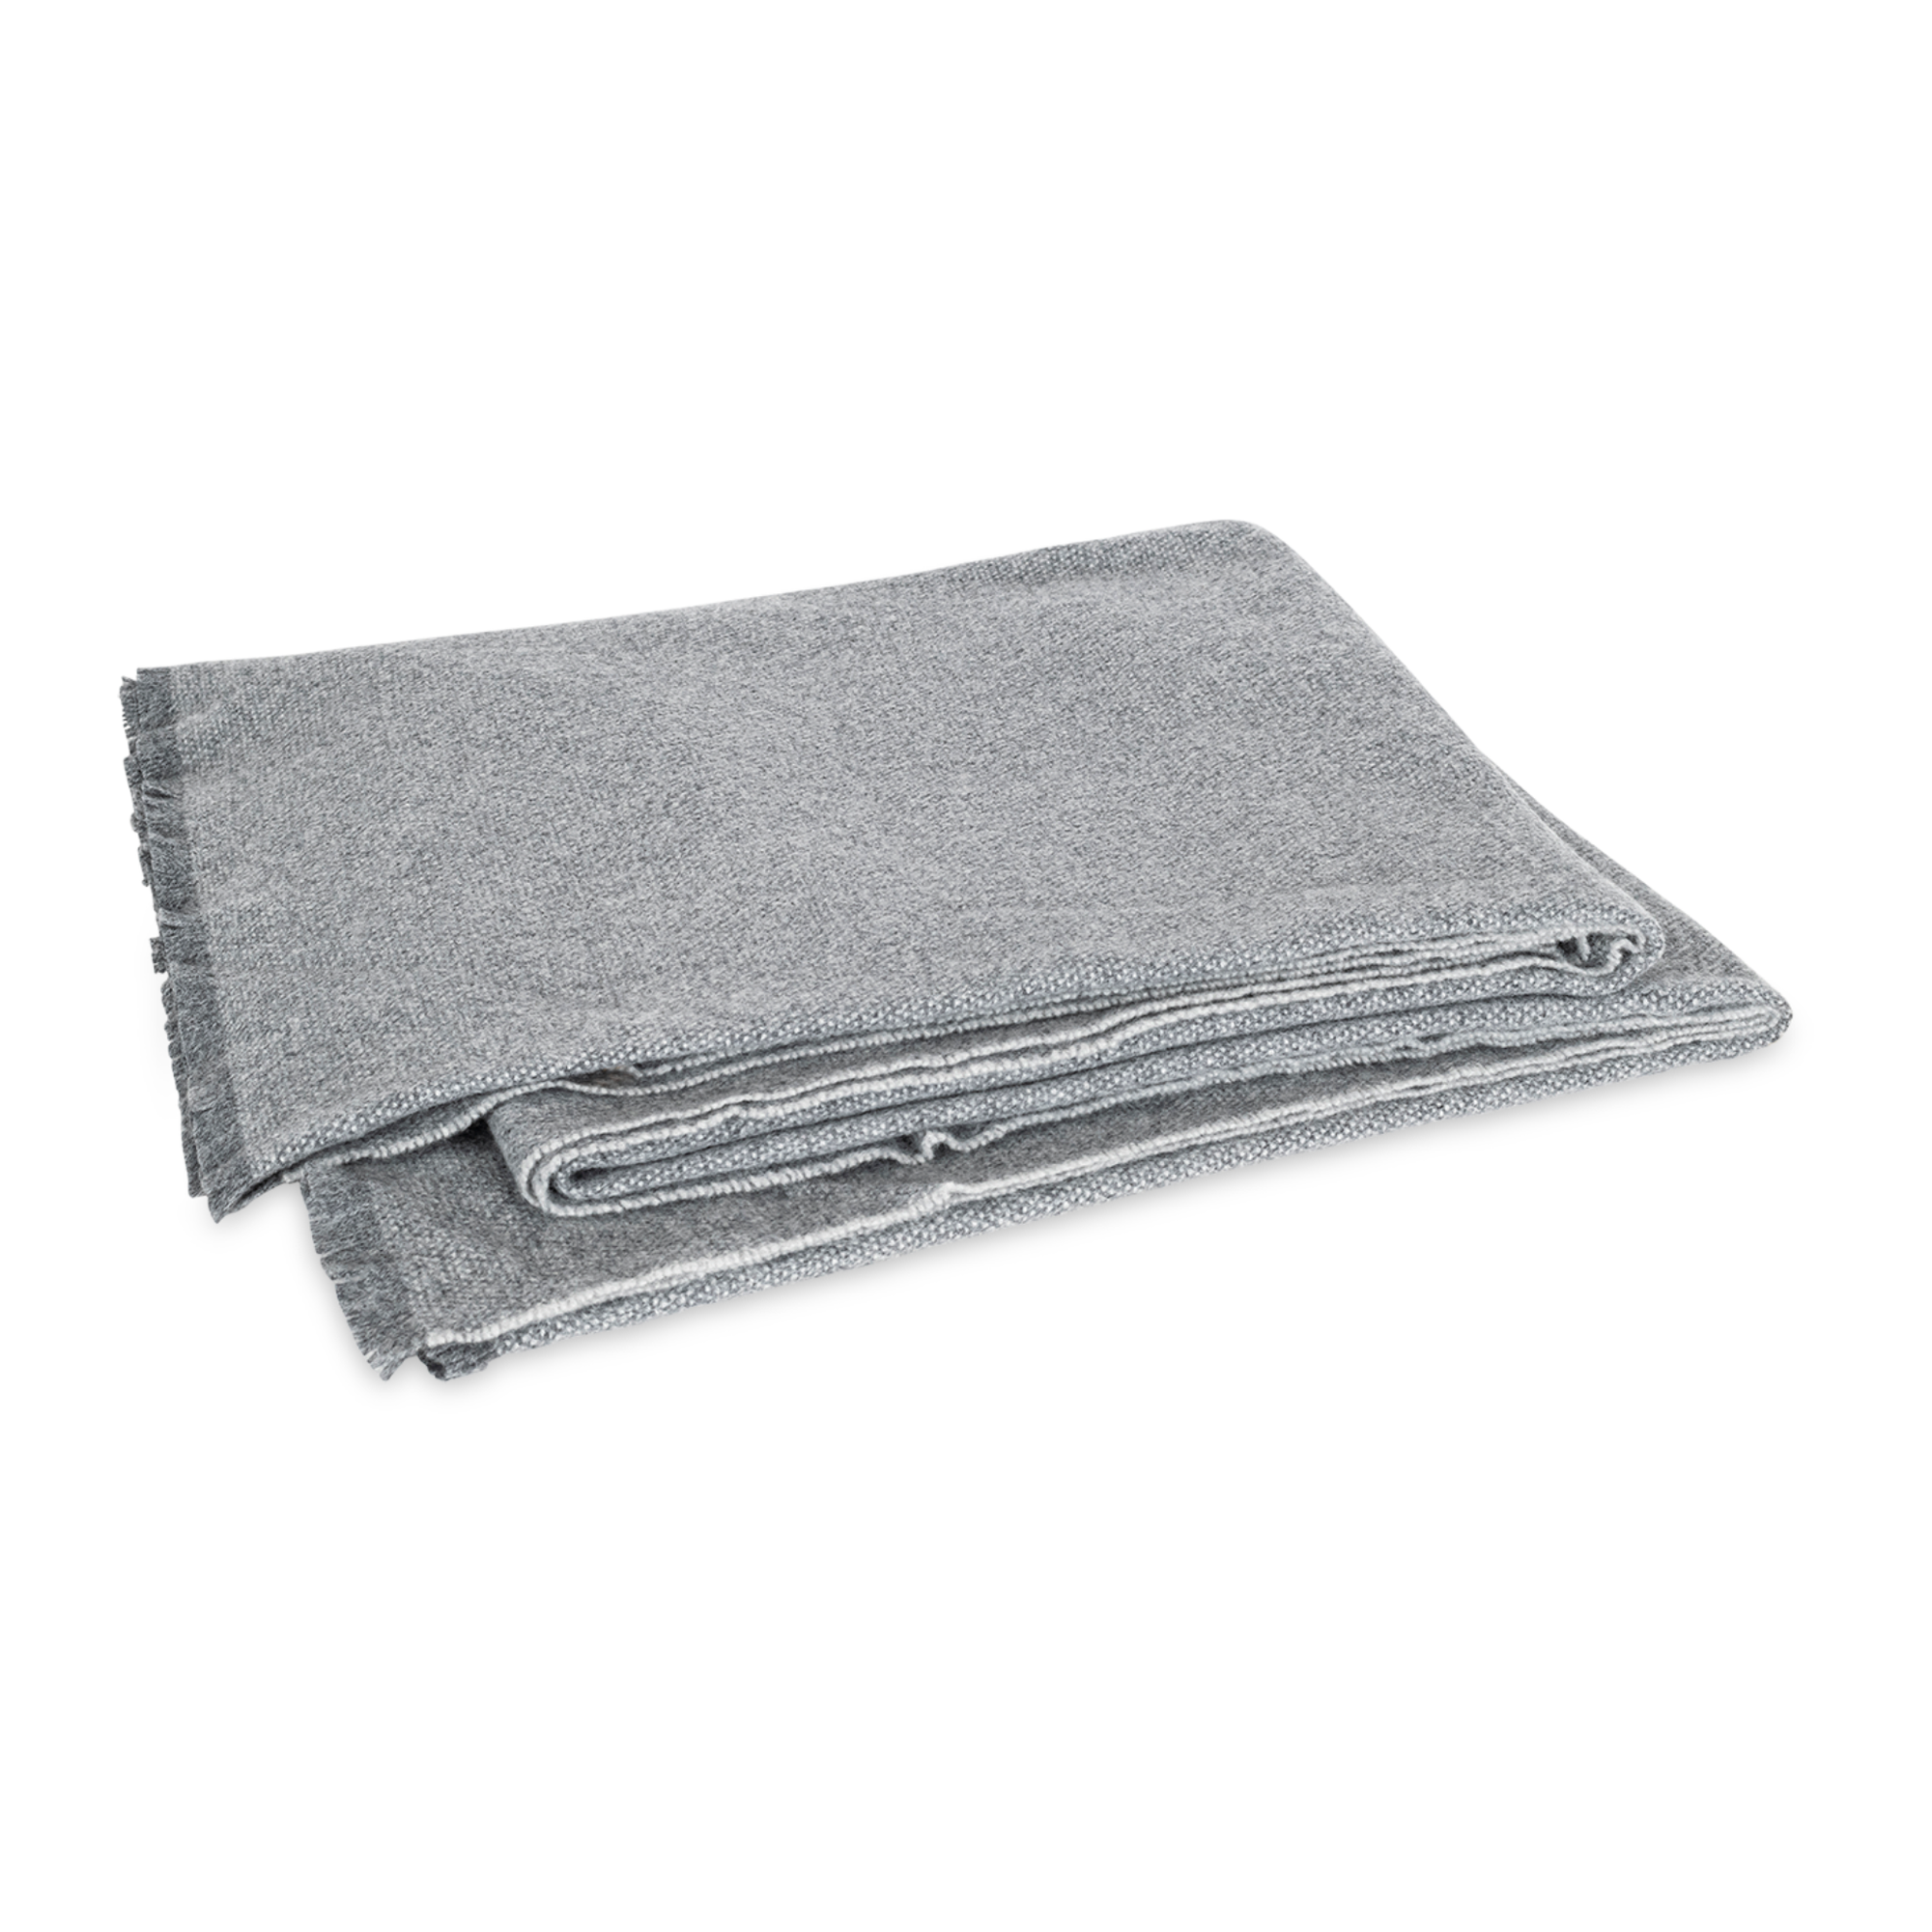 Folded Matouk Agnes Throw in Smoke Grey Color Against White Background